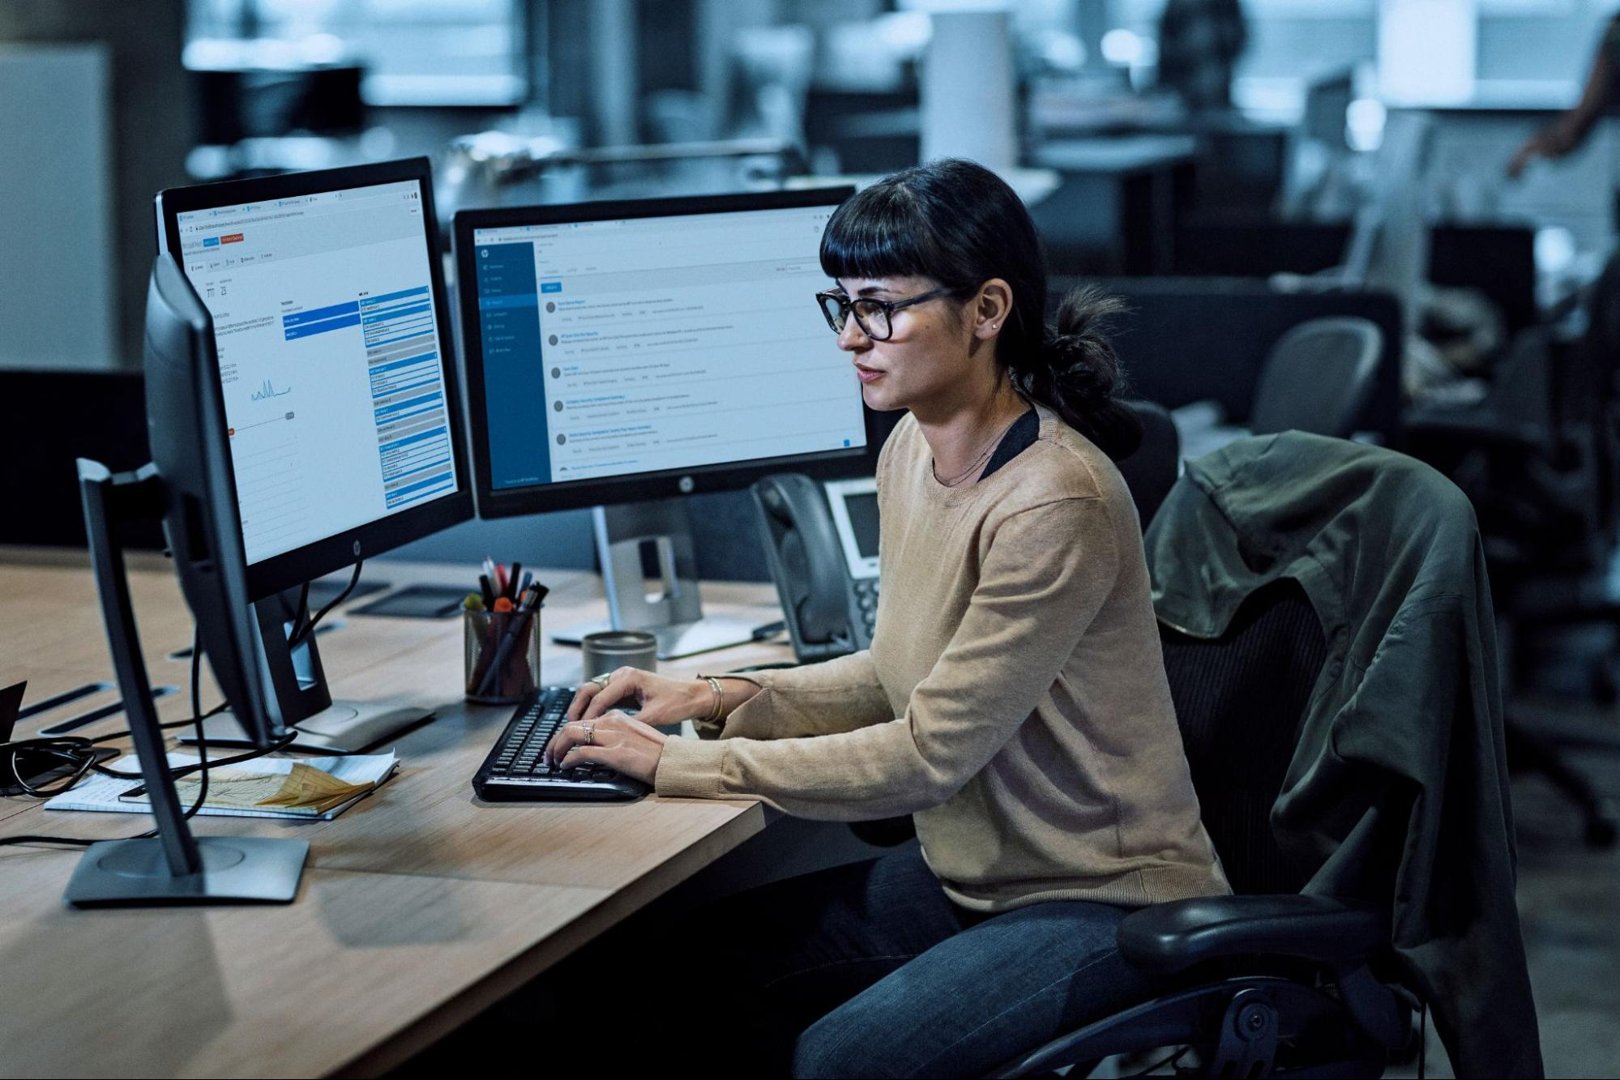 Brunette woman sitting at a desk with multiple computer screens